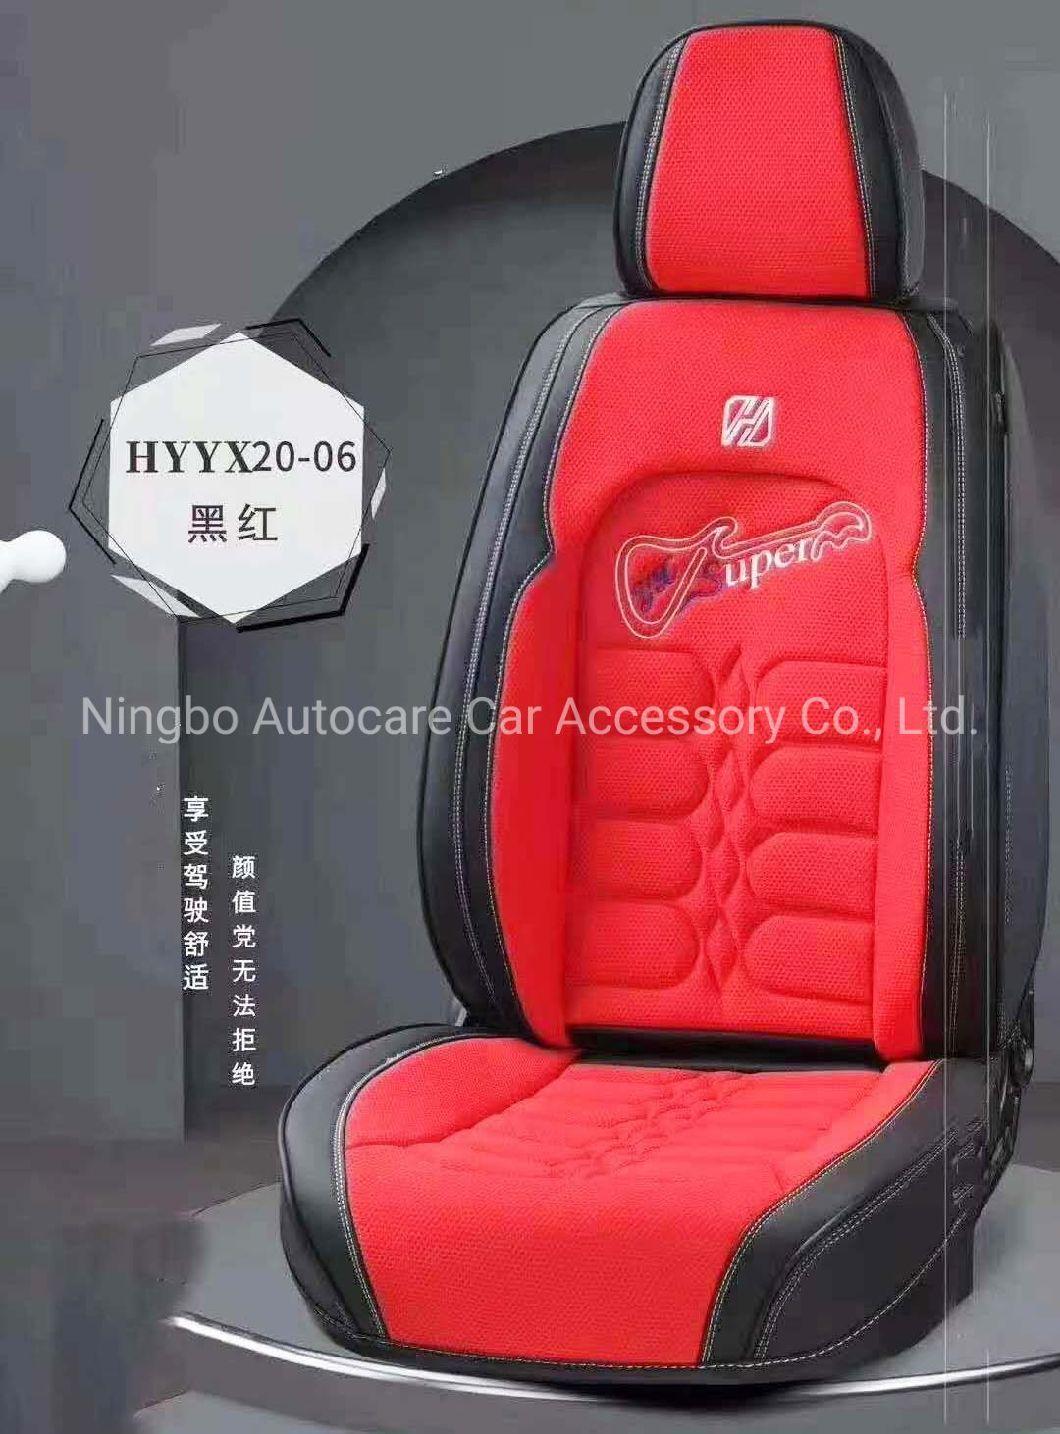 Car Accessories Car Decoration Car Seat Cushion Universal Fashion Pure Red Leather Auto 9d Car Seat Cover